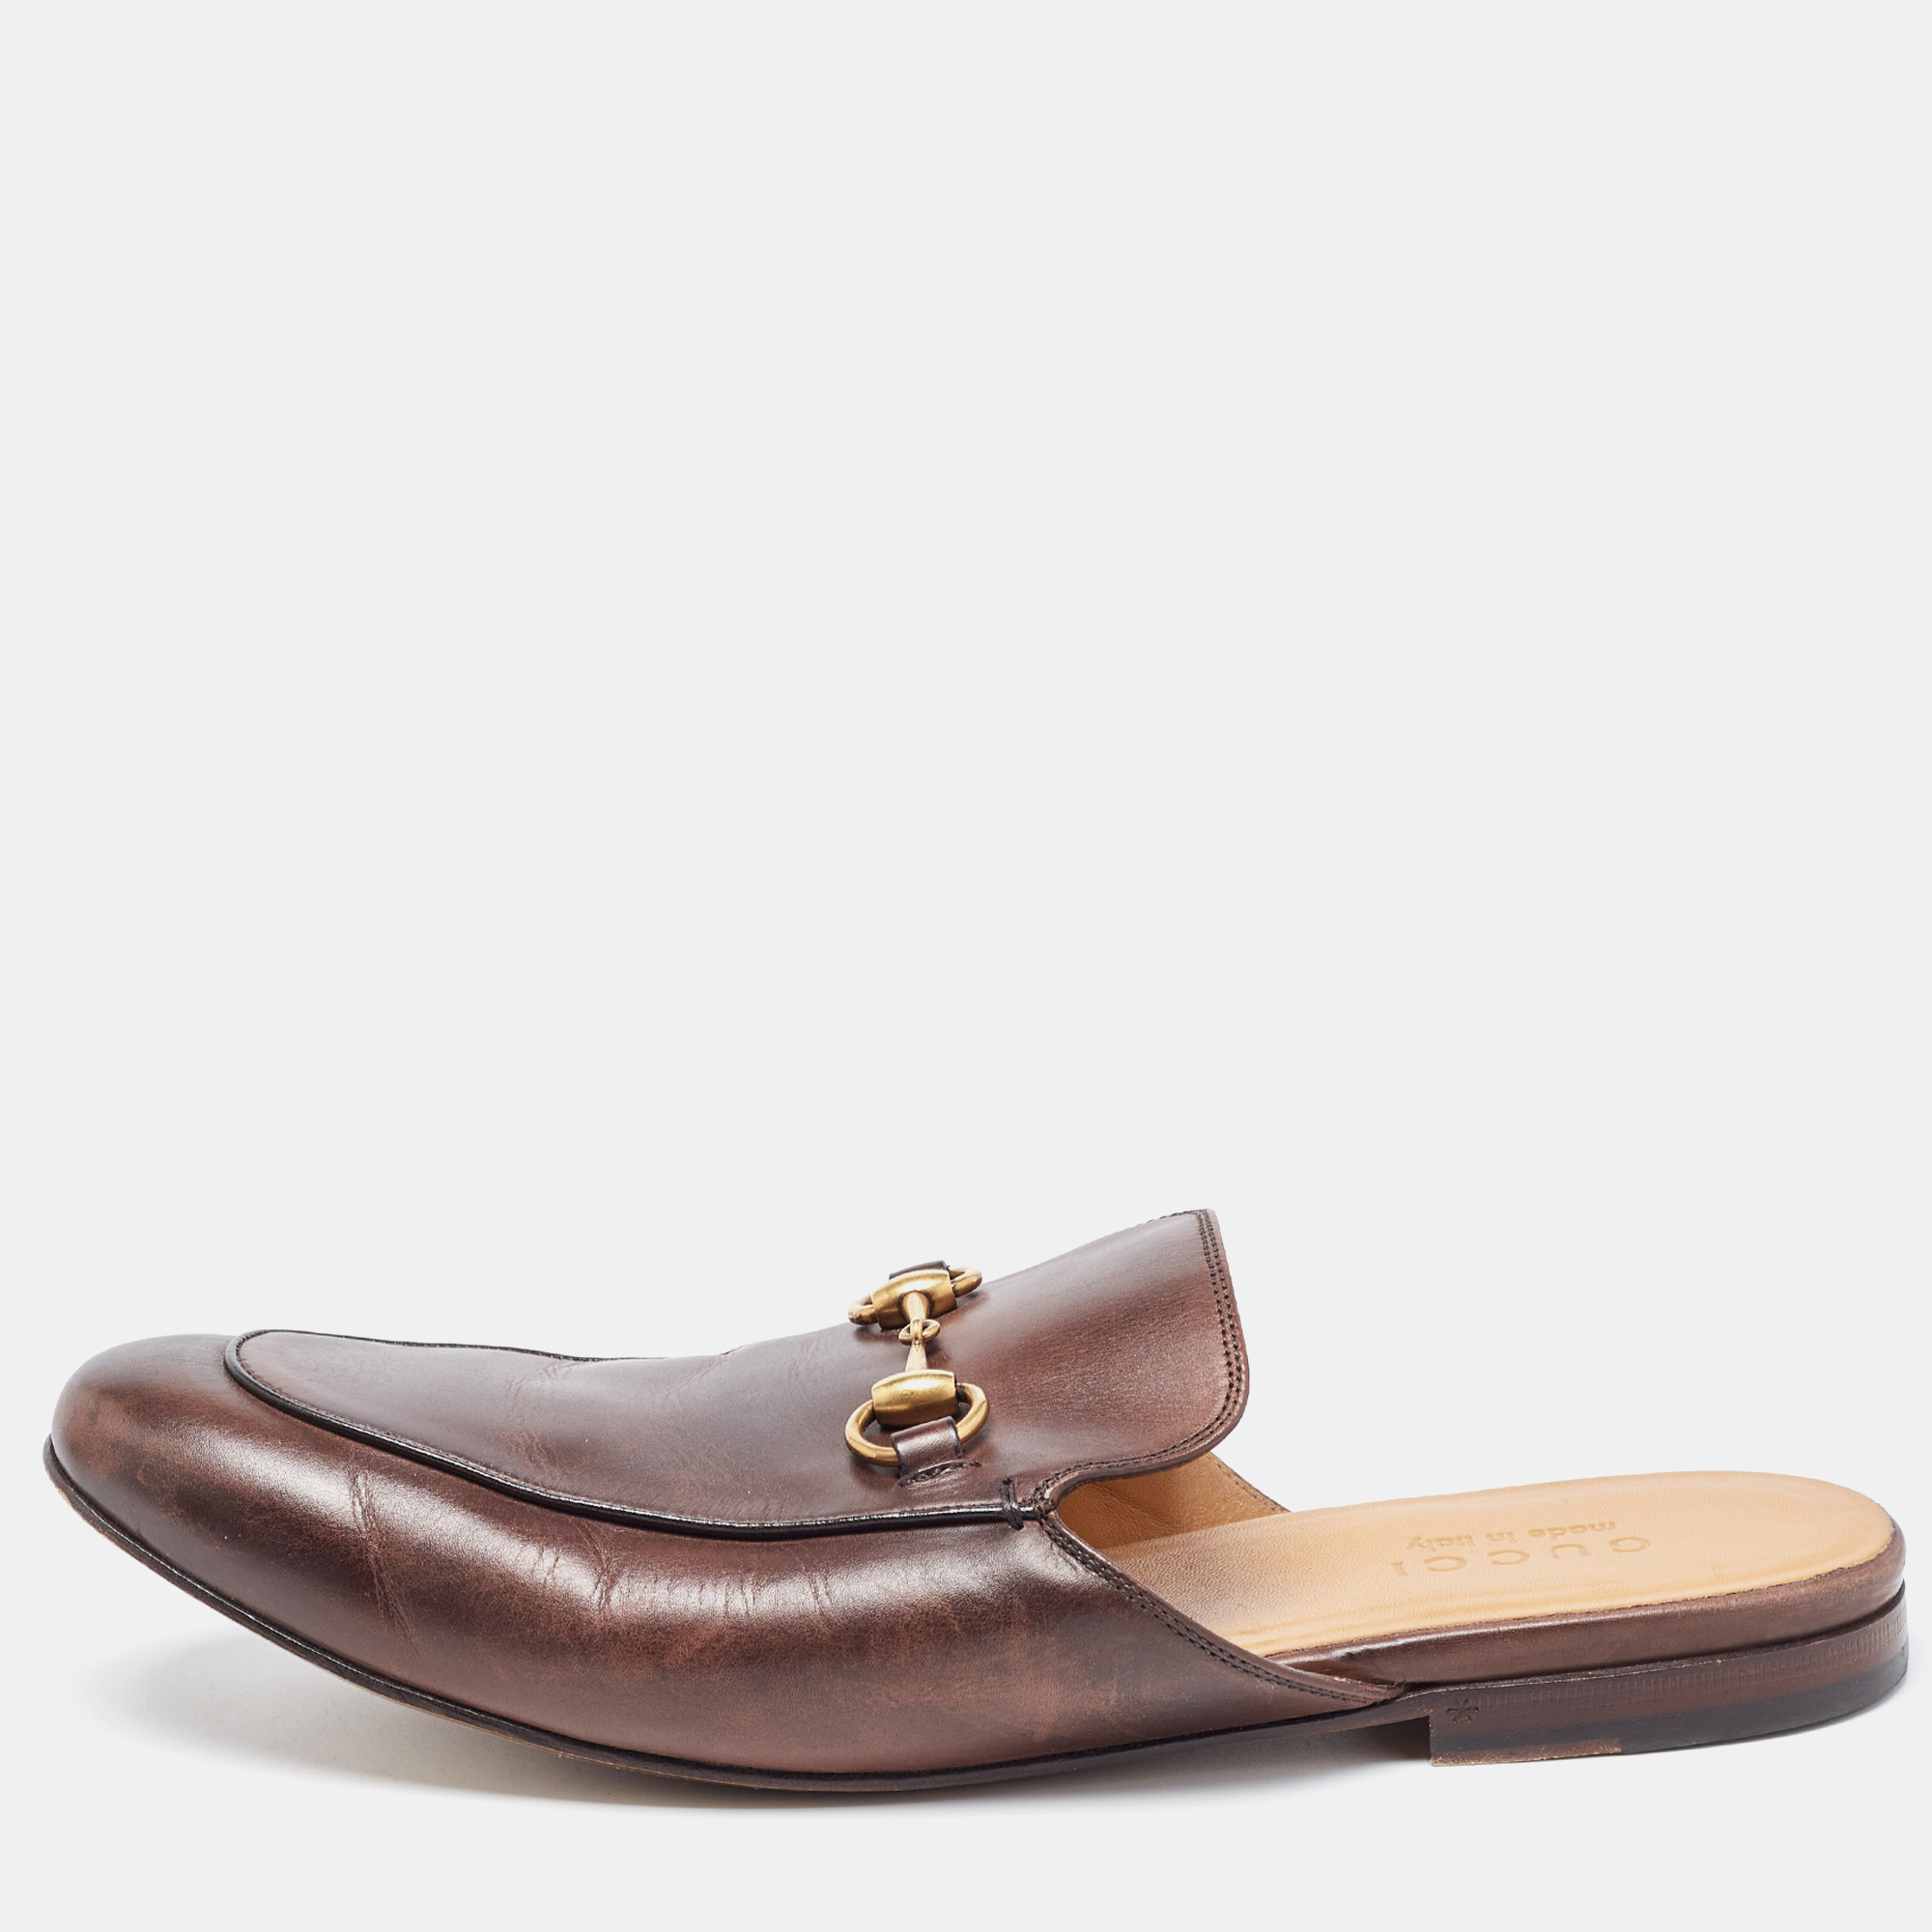 

Gucci Brown Leather Horsebit Princetown Flat Mules Size